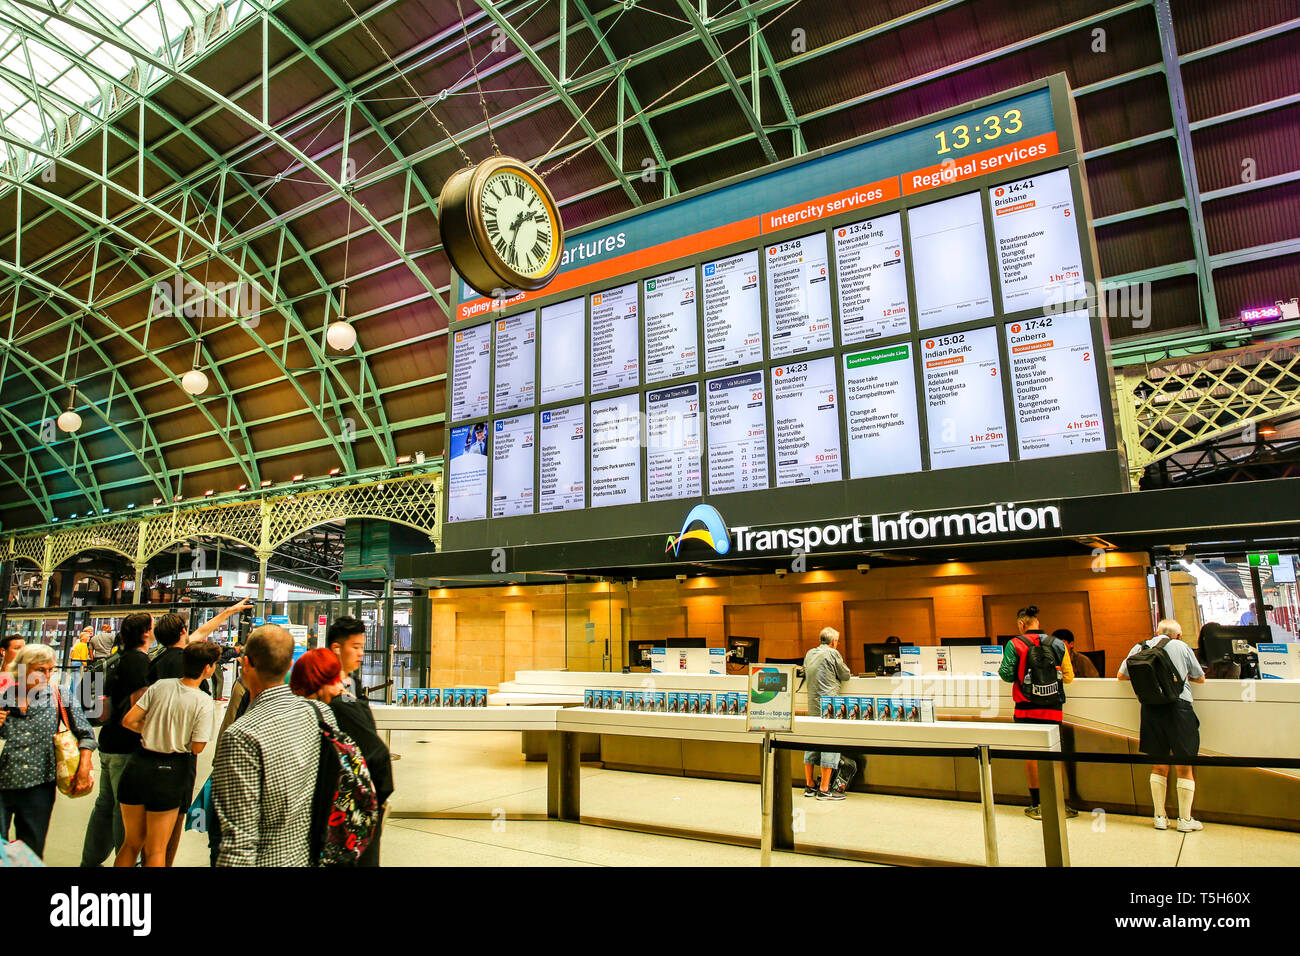 Central station, railway terminus station in Sydney city centre,New South Wales Australia, with station clock and transport information board Stock Photo